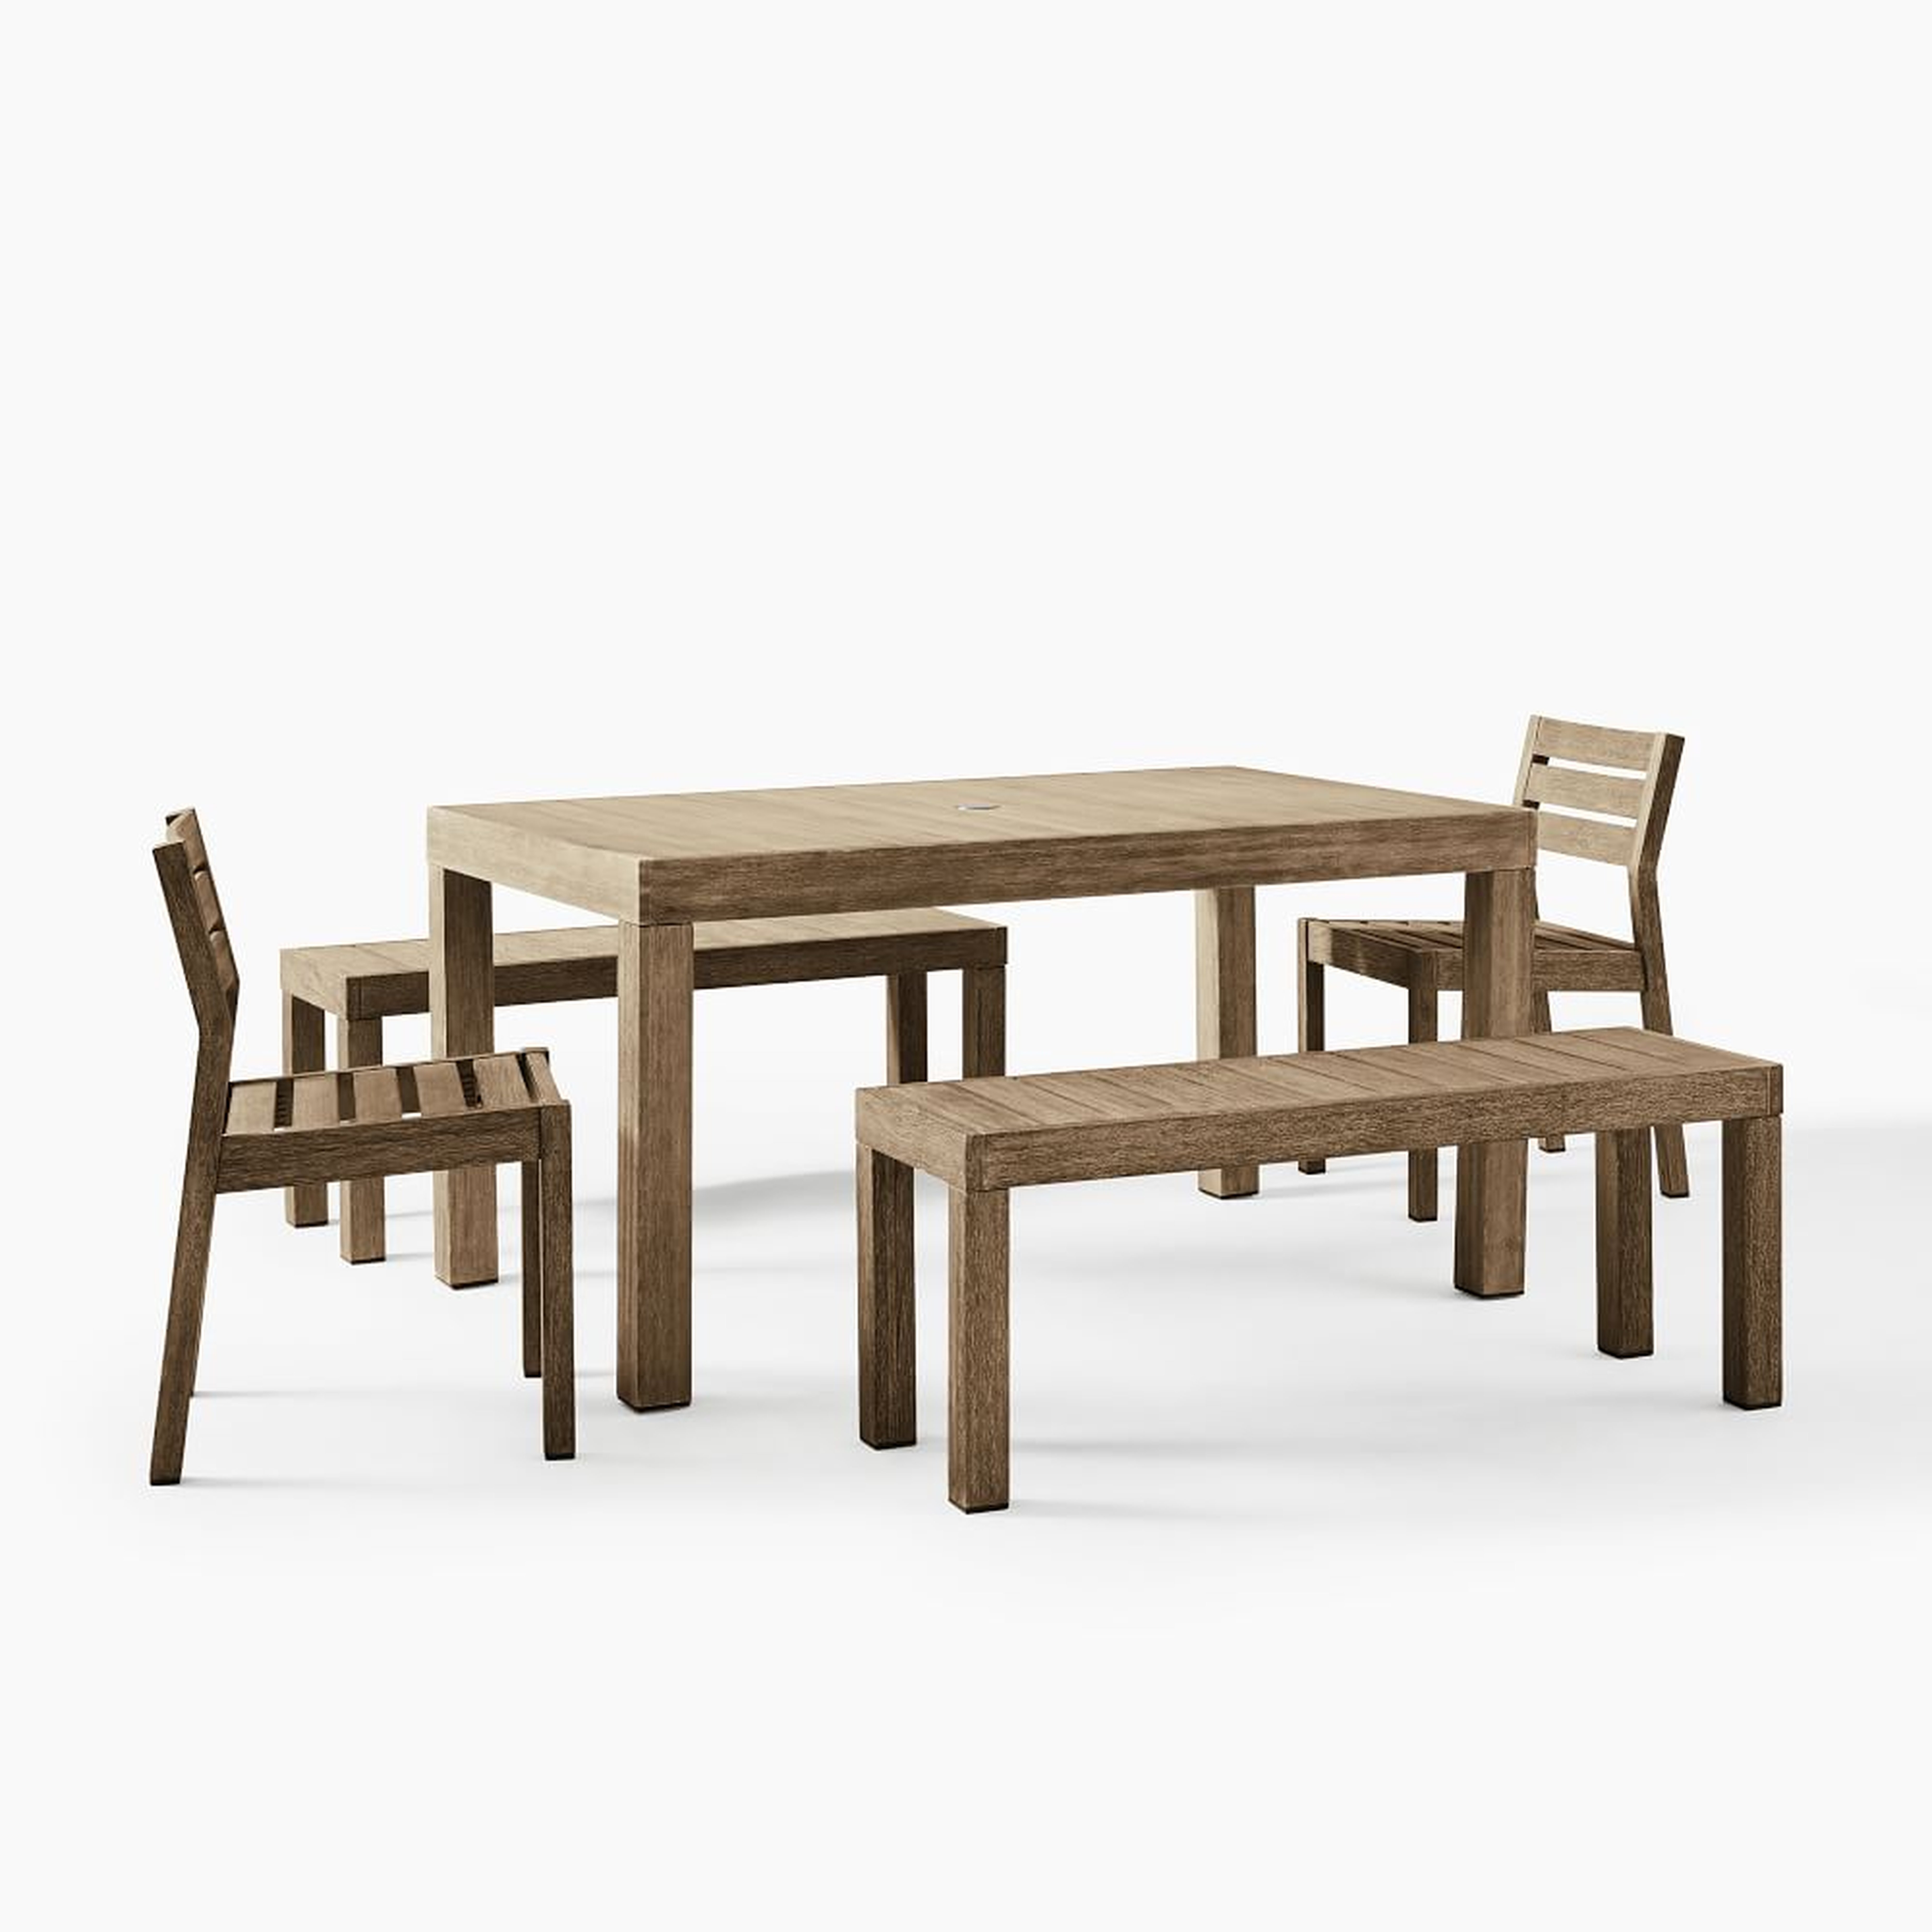 Portside Outdoor 58.5" Dining Table, 2 Benches & 2 Wood Chairs Set, Driftwood - West Elm